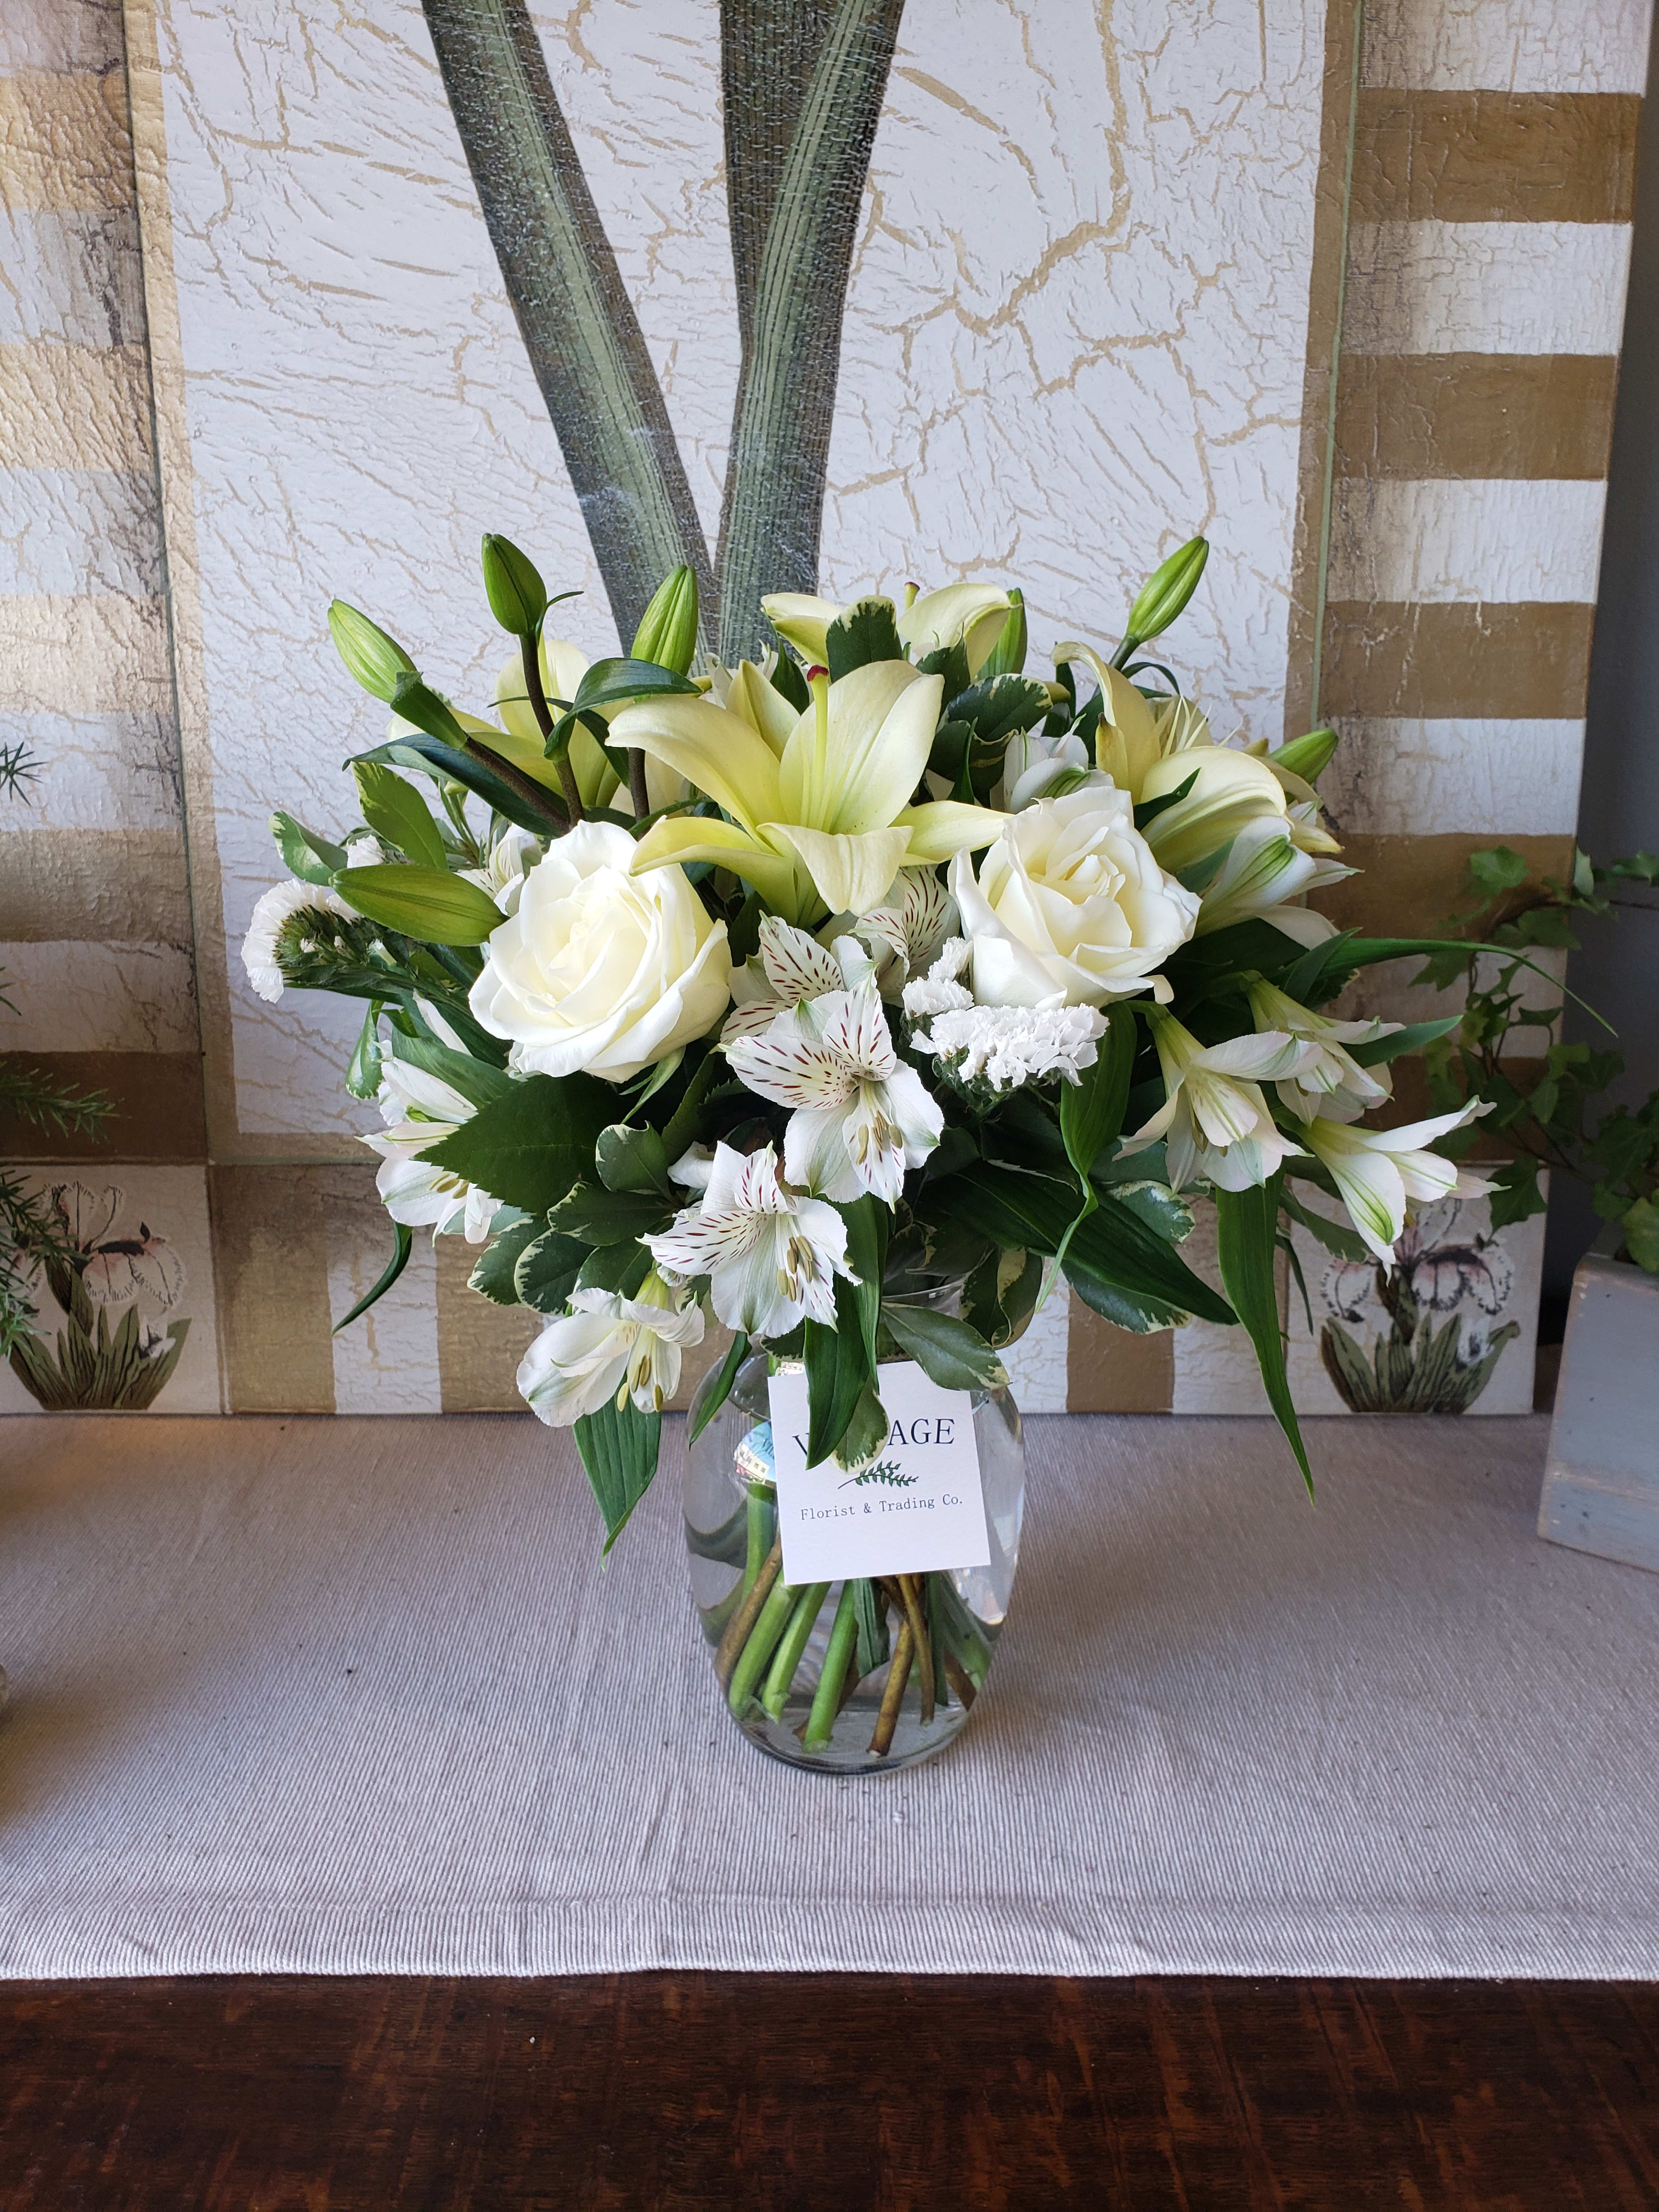 Classy - Classy is an elegant mix of white lilies, white Alstroemeria, white Statice and Classic White Roses. Tastefully arranged in a clear glass vase. 